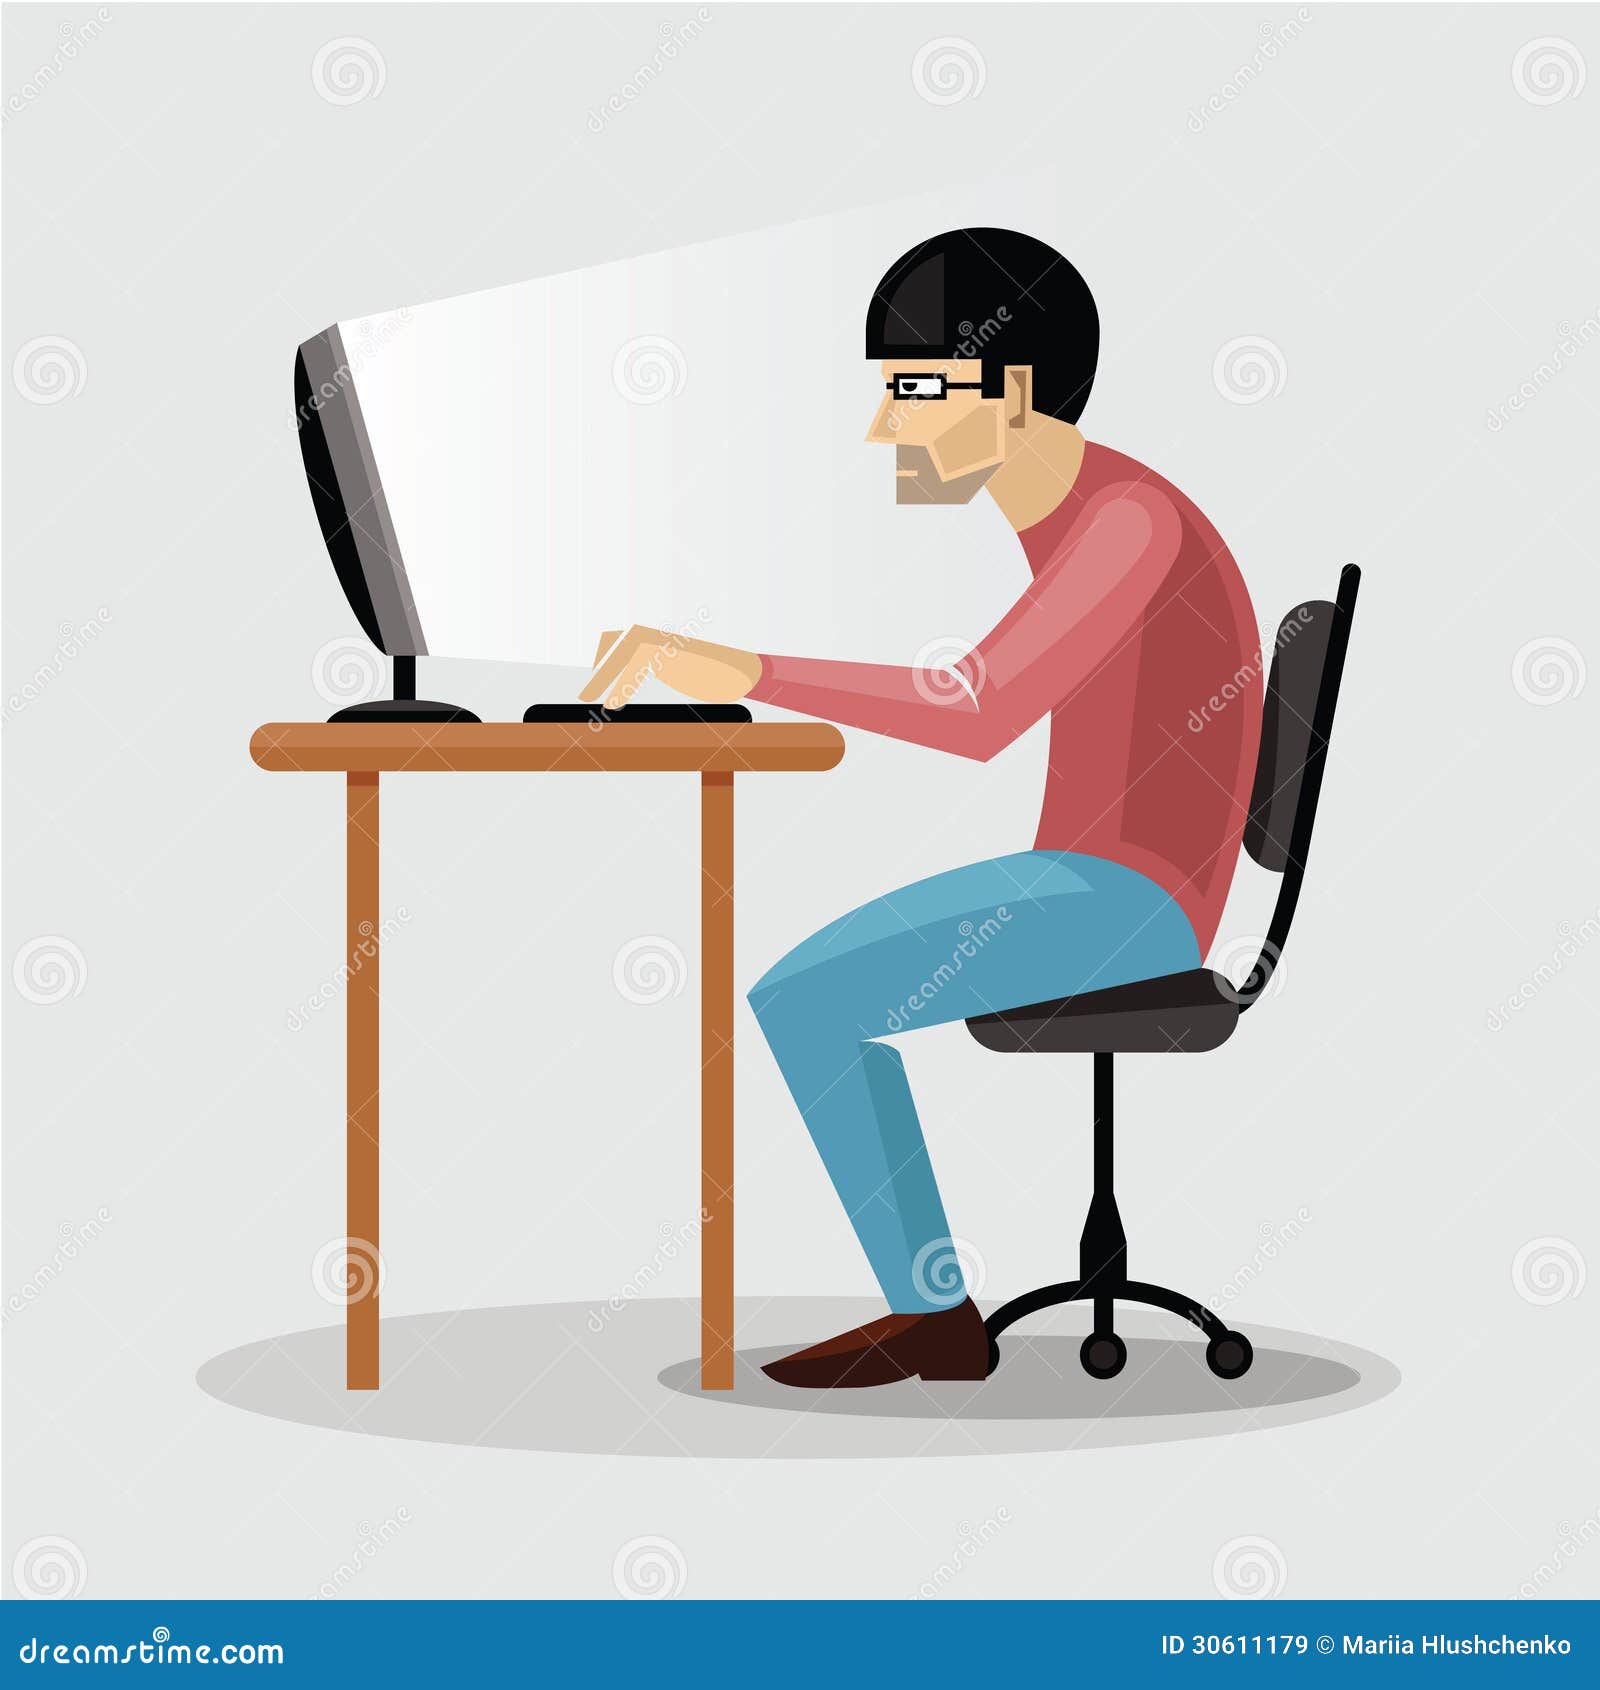 clipart man working at desk - photo #30